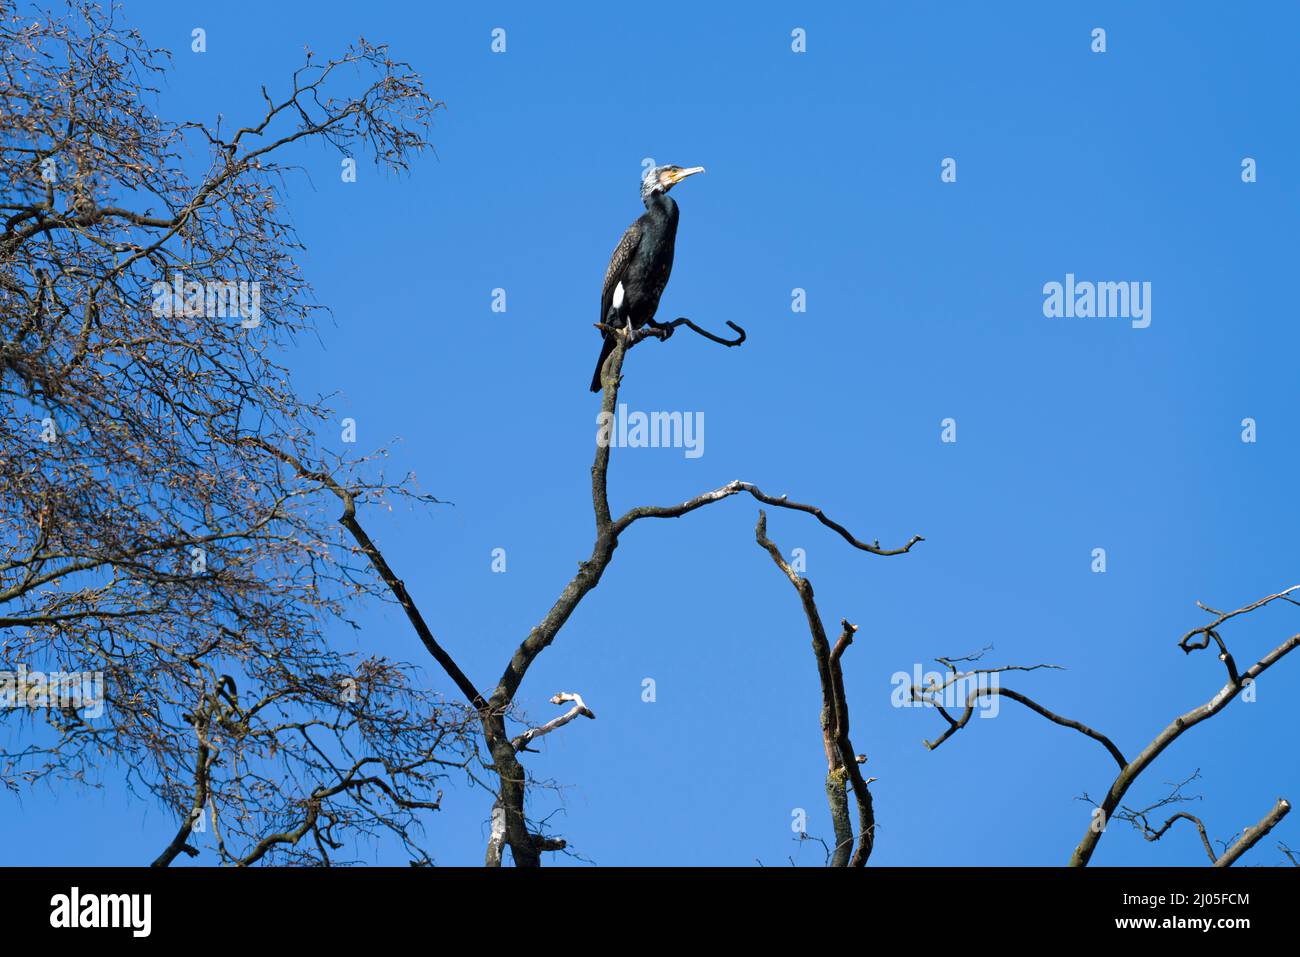 A great cormorant (Phalacrocorax carbo), Hannoversch Münden, Lower Saxony, Germany, Europe Stock Photo